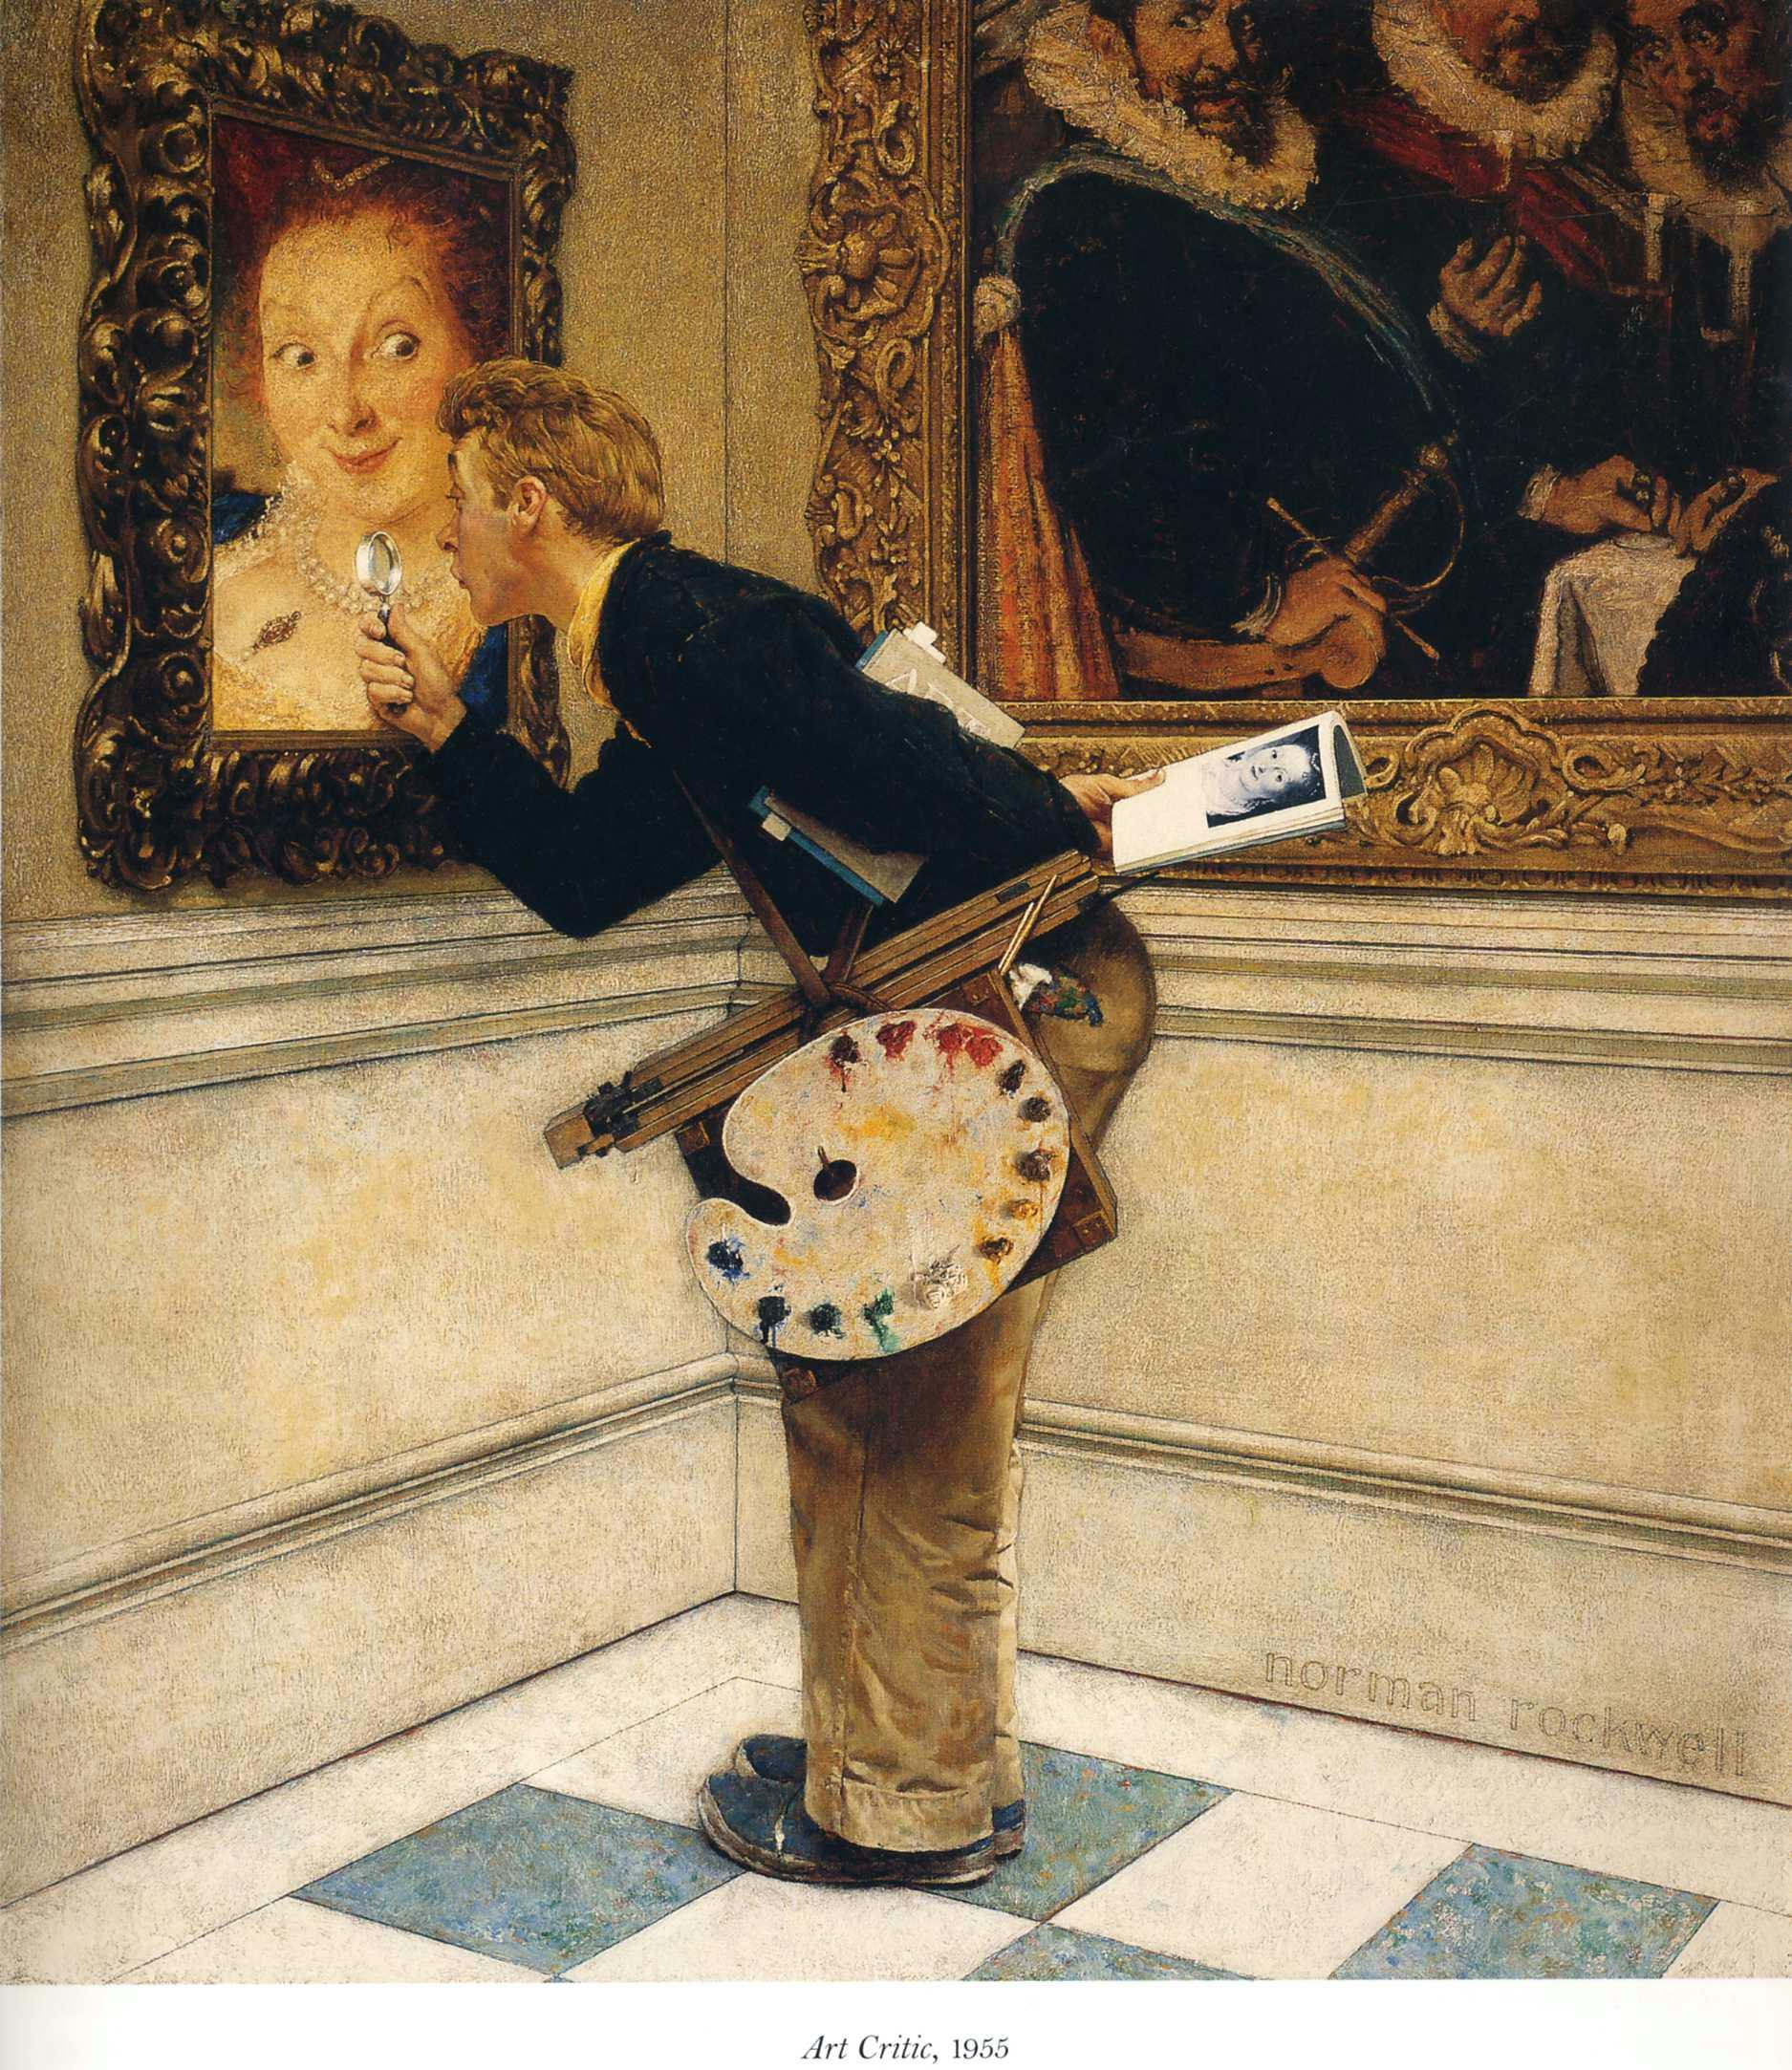 Art Critic (1955) by Norman Rockwell